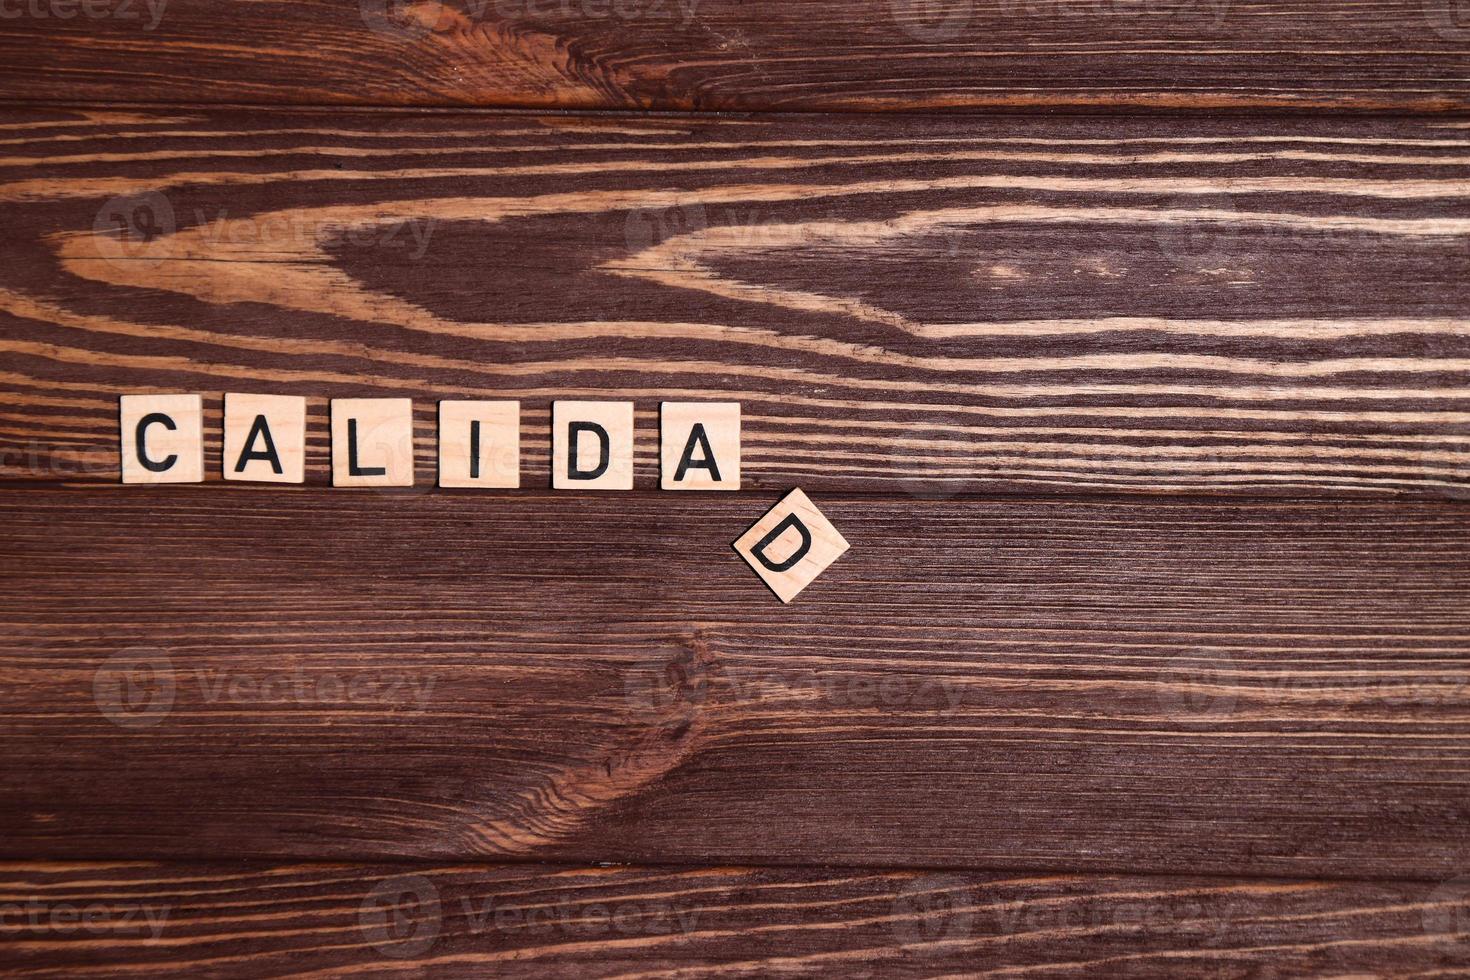 Calidad, quality spanish word, lettering on wooden background photo